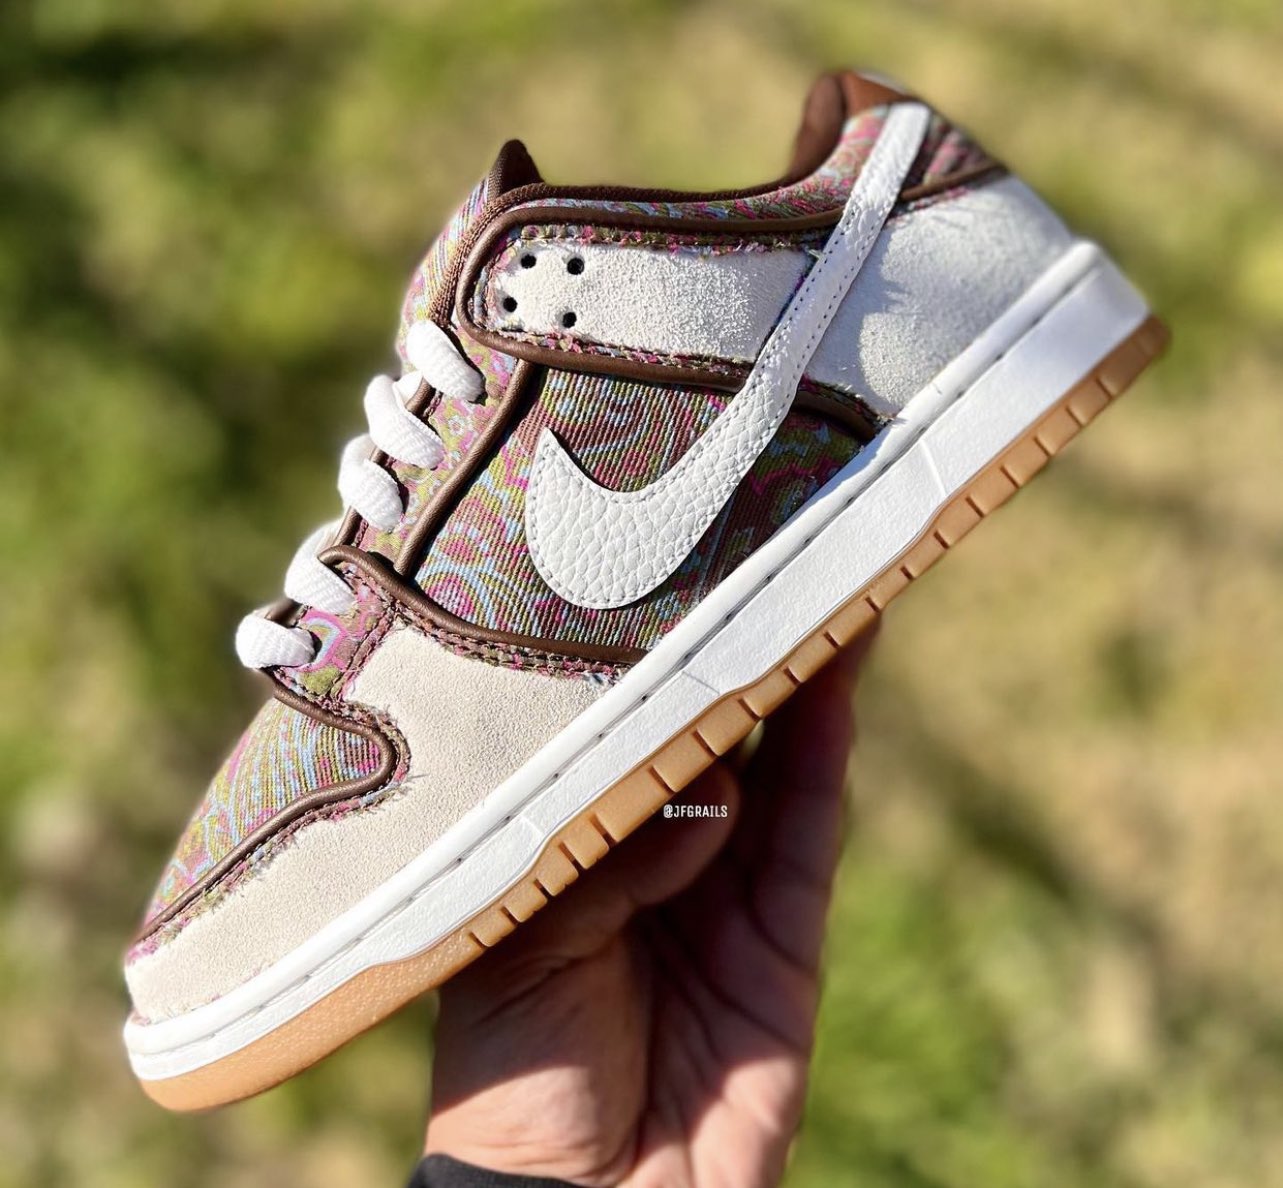 Nike SB nike sb dunks suede Dunk Low "Brown Paisley" DH7534-200 Release Date